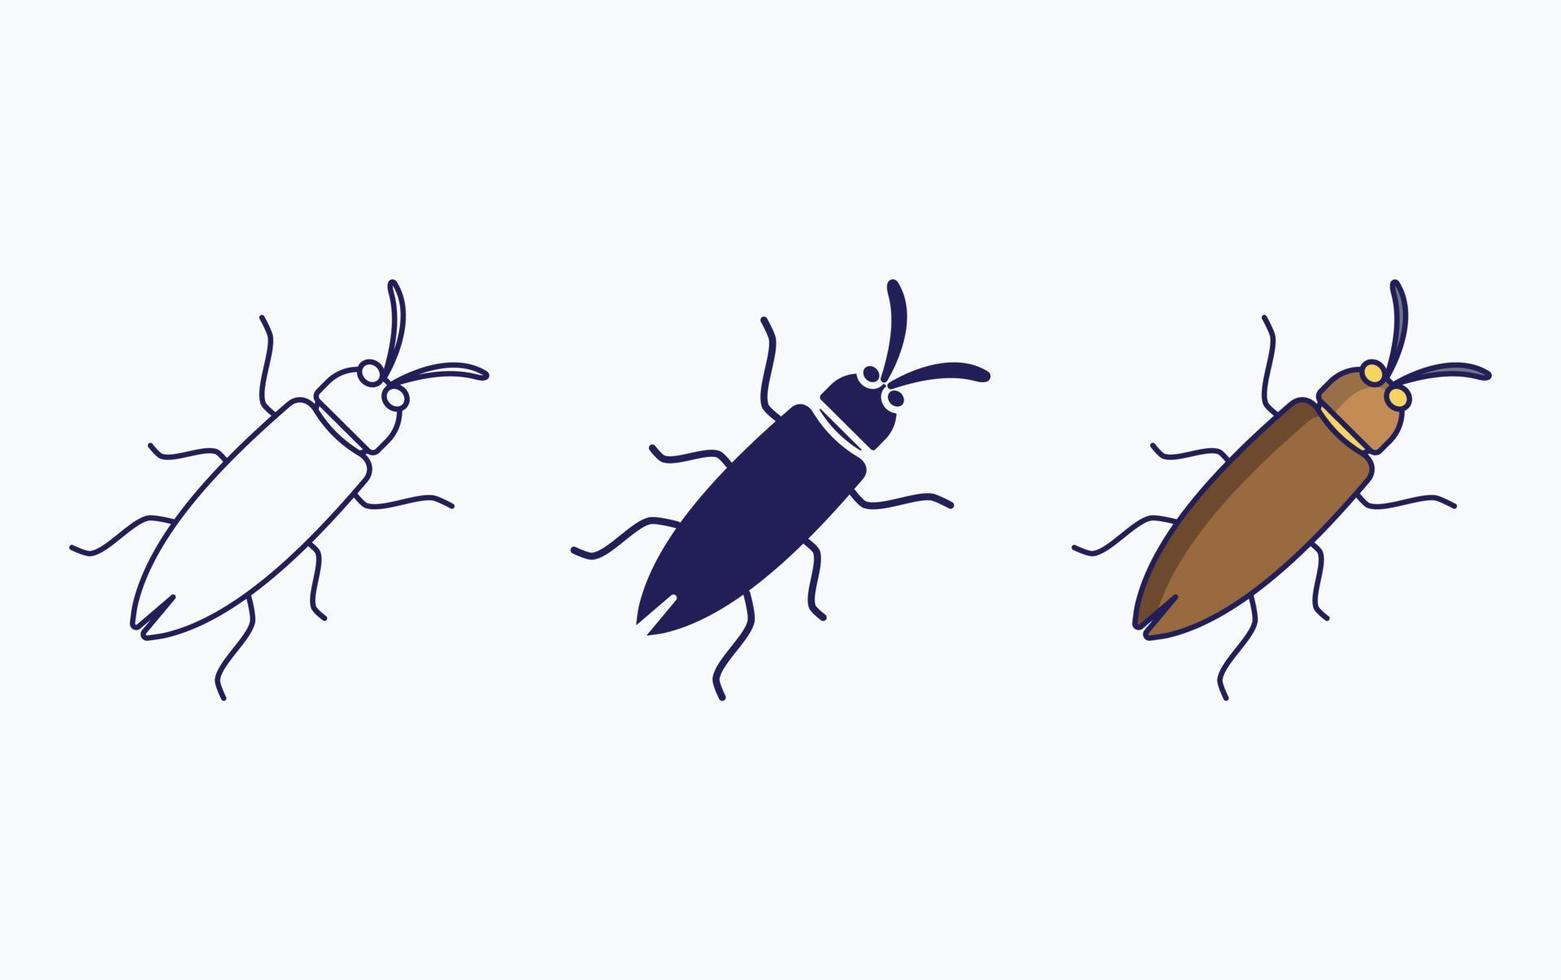 Bug and insect vector illustration icon